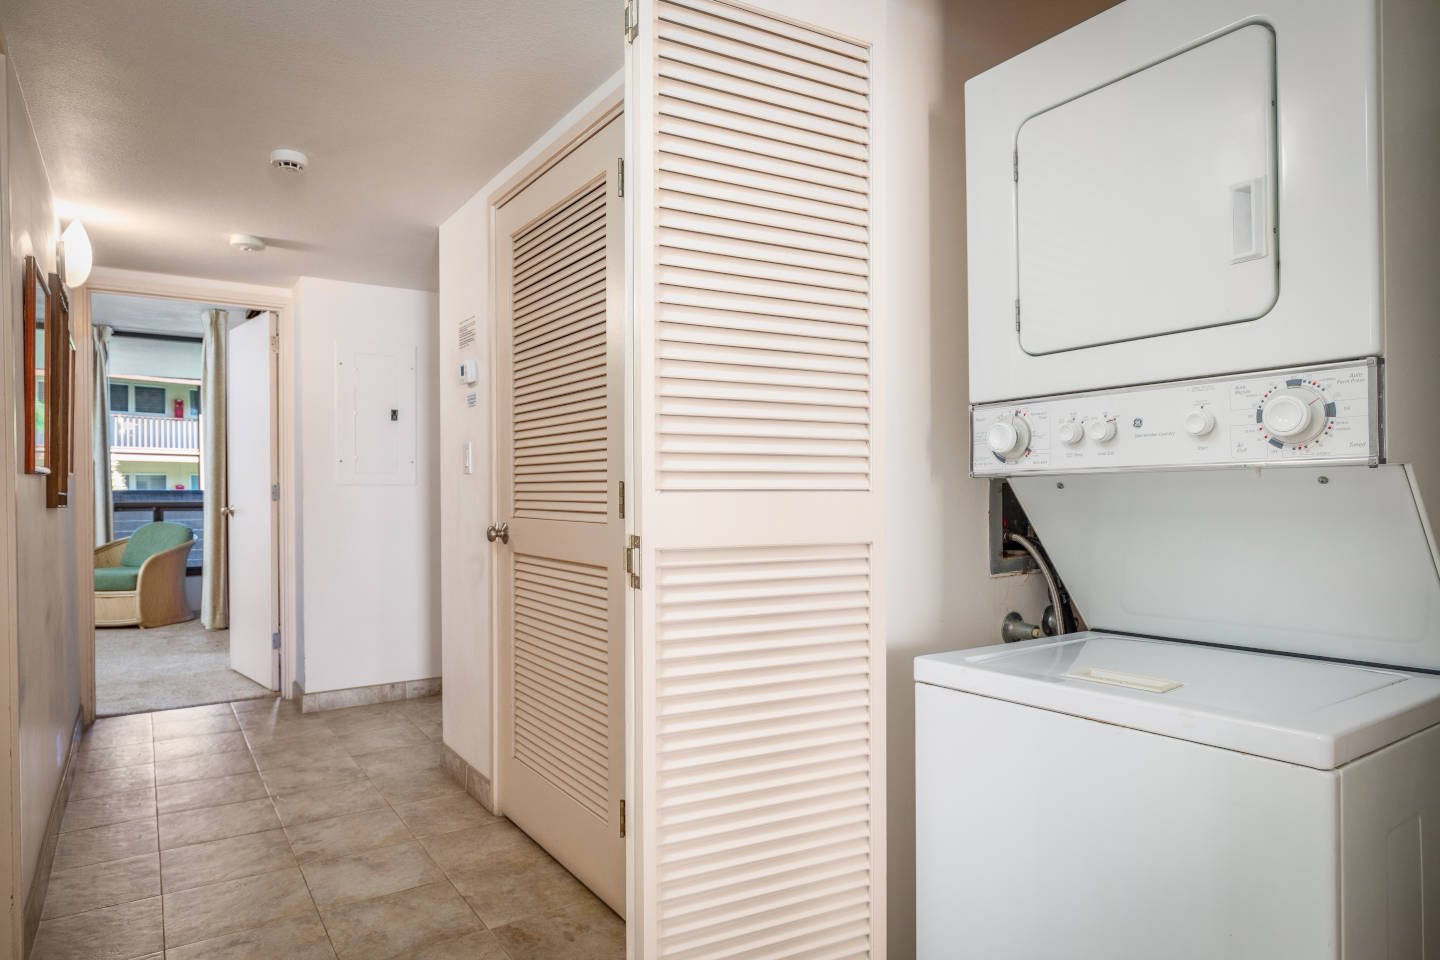 One-Bedroom Ocean View in-room washer and dryer single unit tucked away in the hallway closet 